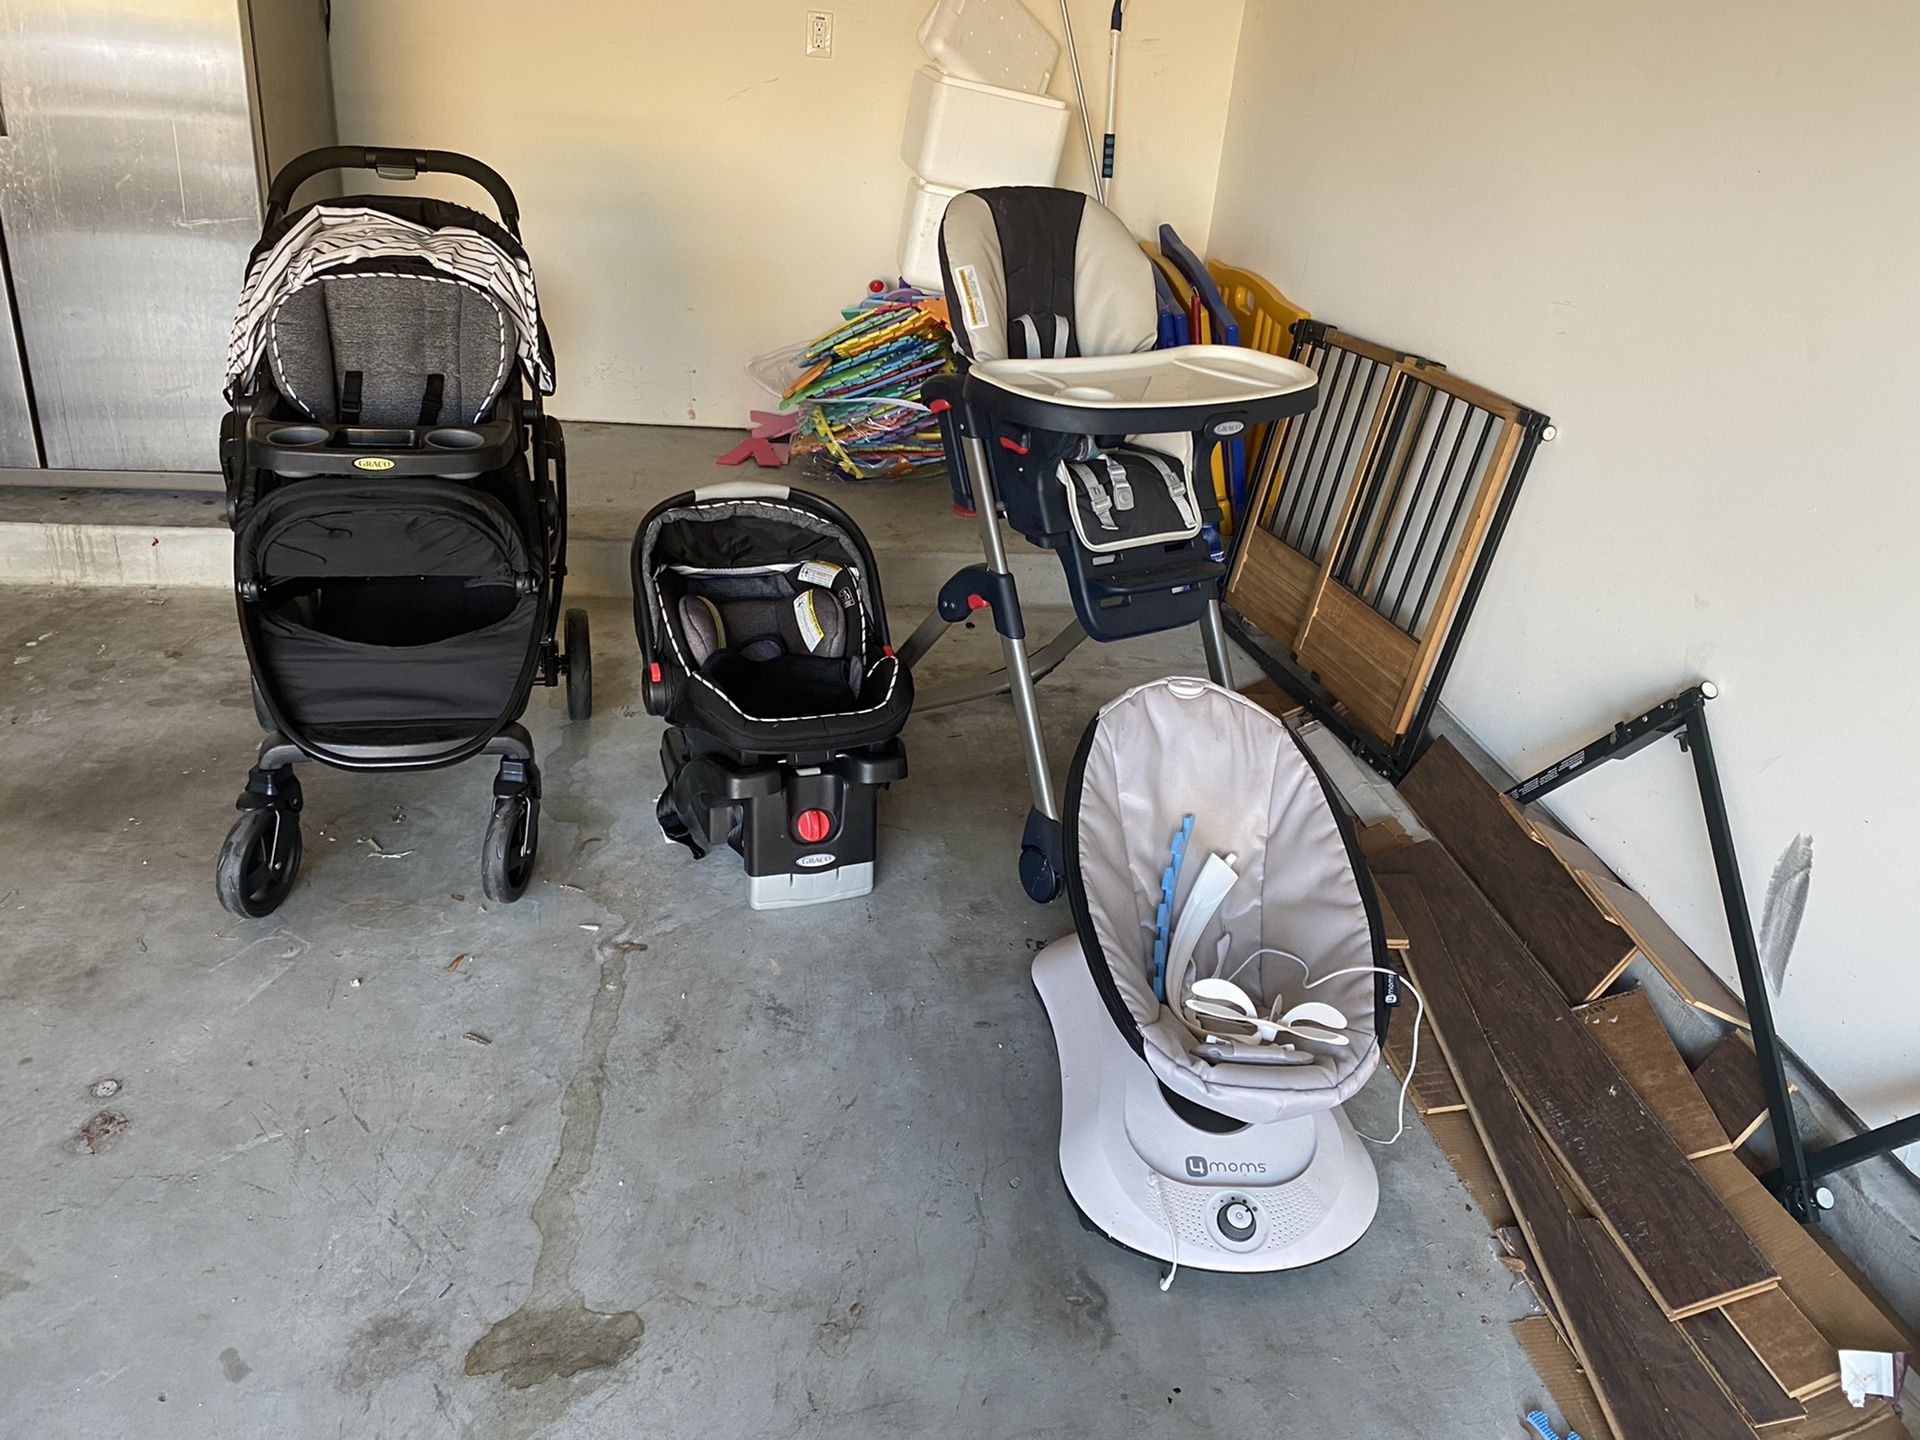 Infant car seat, high chair, stroller, and electric rocker